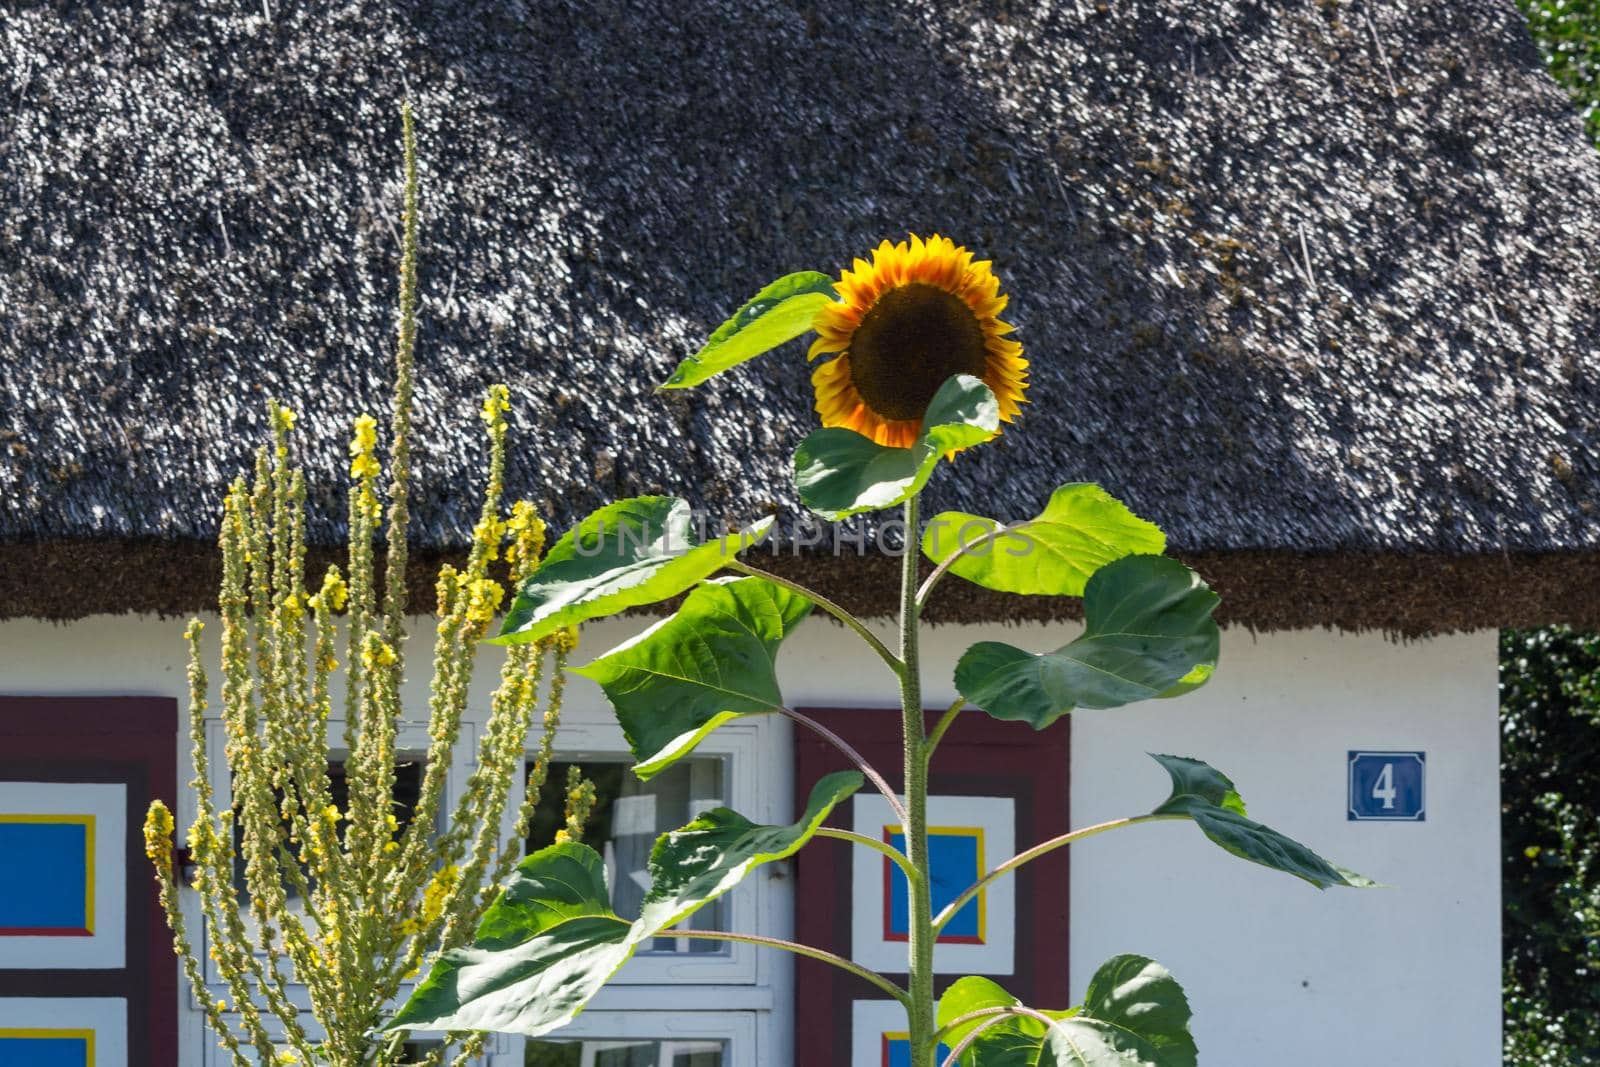 House with sunflowers by JFsPic